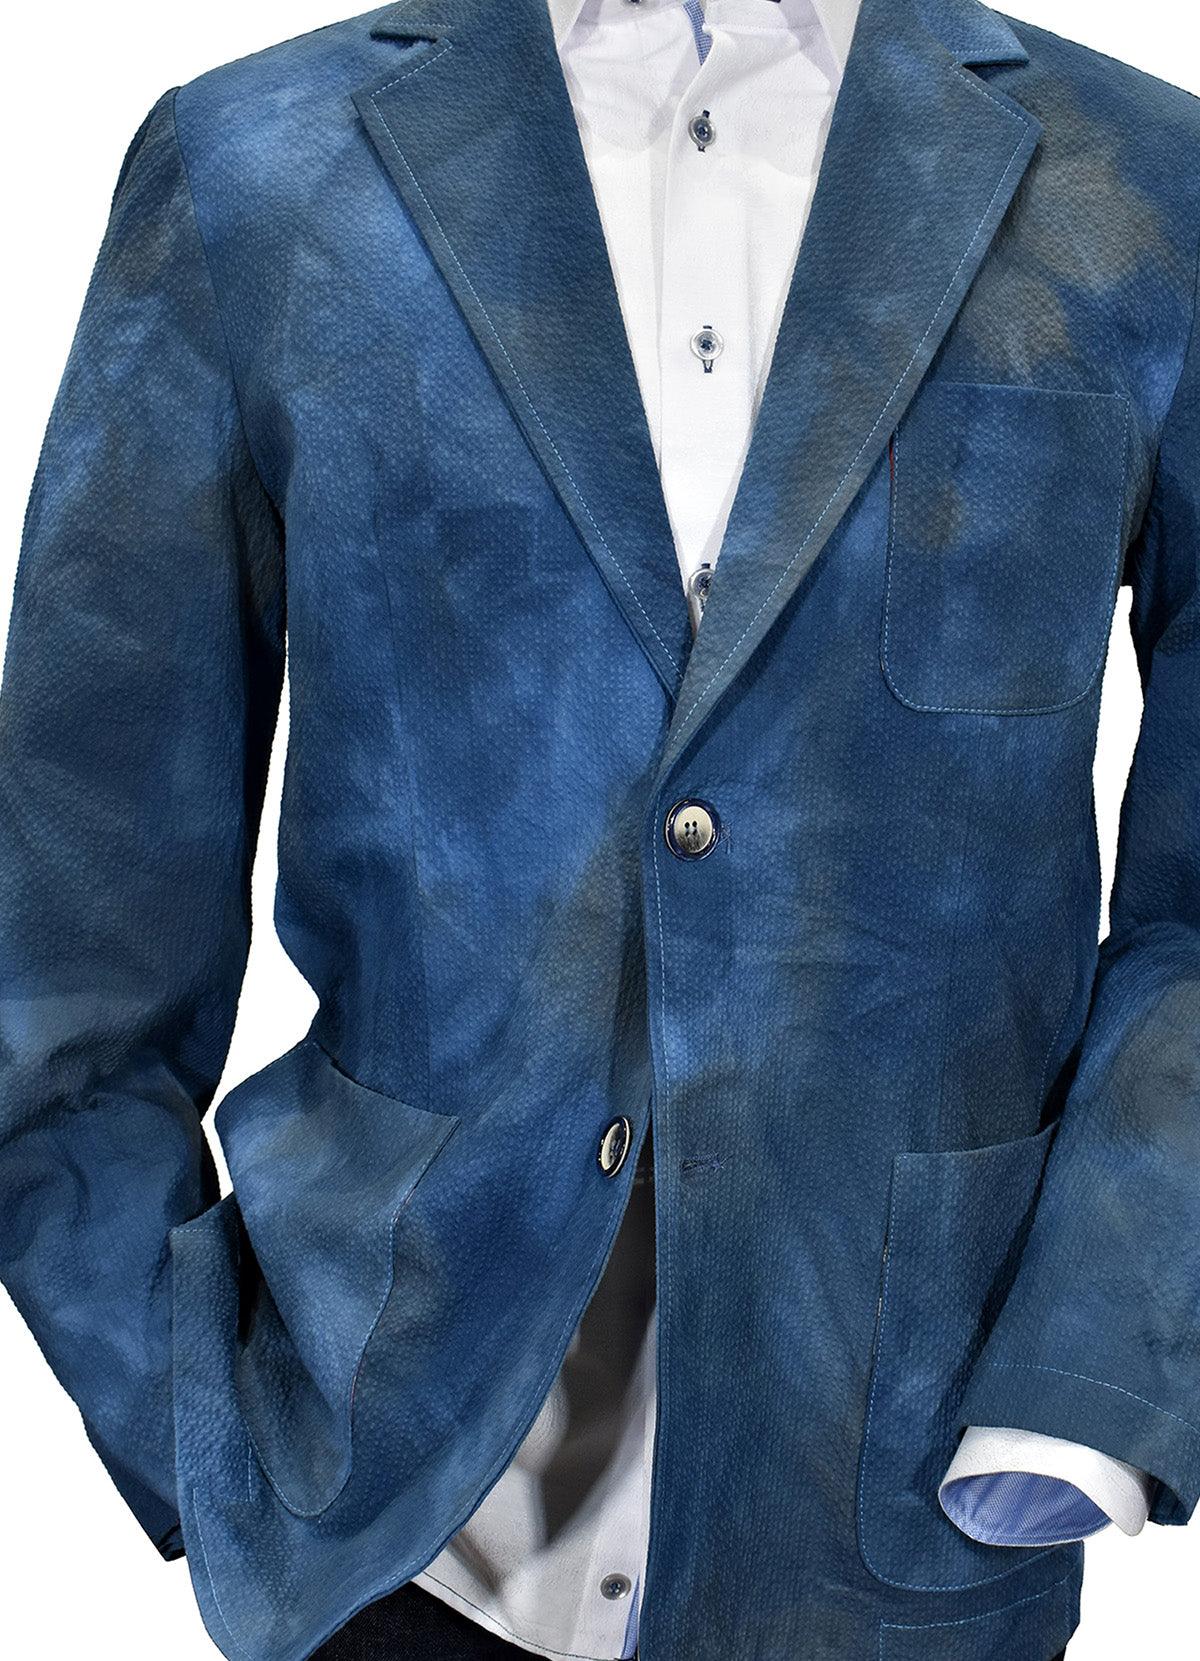 When your image makes a statement, it surely will be when wearing this textured washed and dyed sport coat. Uniquely designed and produced by Graison in Italy featuring a soft shadow seersucker fabric, washed for a distressed, cool image.  Graison Graham Inspired Italian Sport Coat  Excellent with jeans or pants. Fine textured fabric adds to the image. Nice mix of blue and navy washed colors. Soft coat, should lined. Modern fit, best for a slim to medium build.